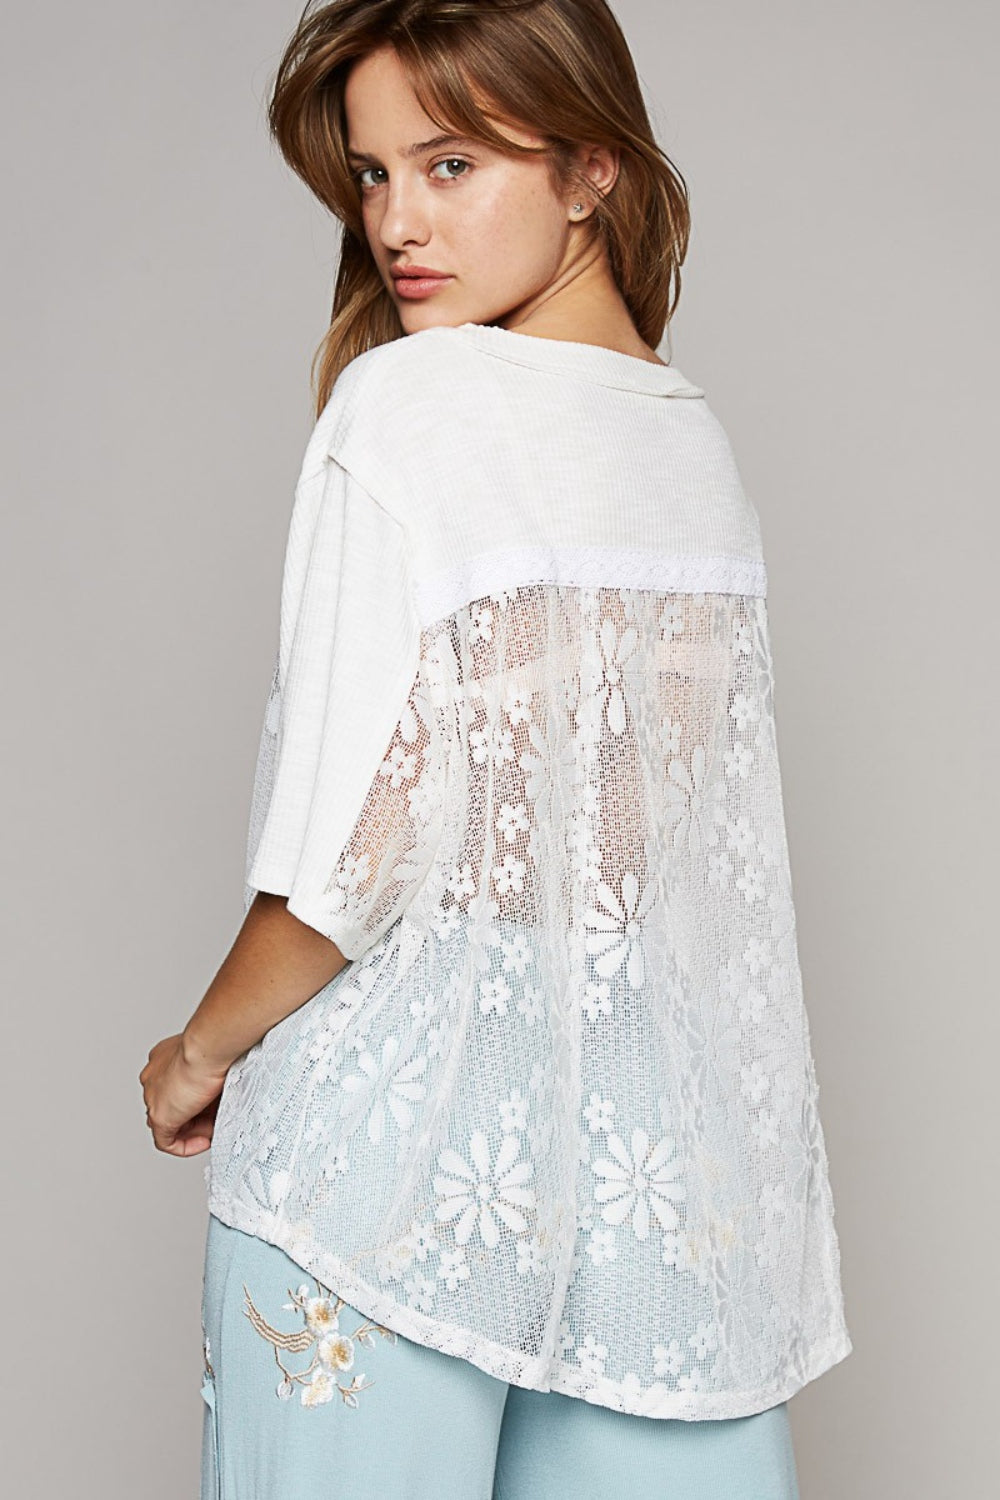 POL Sleeve Lace Top